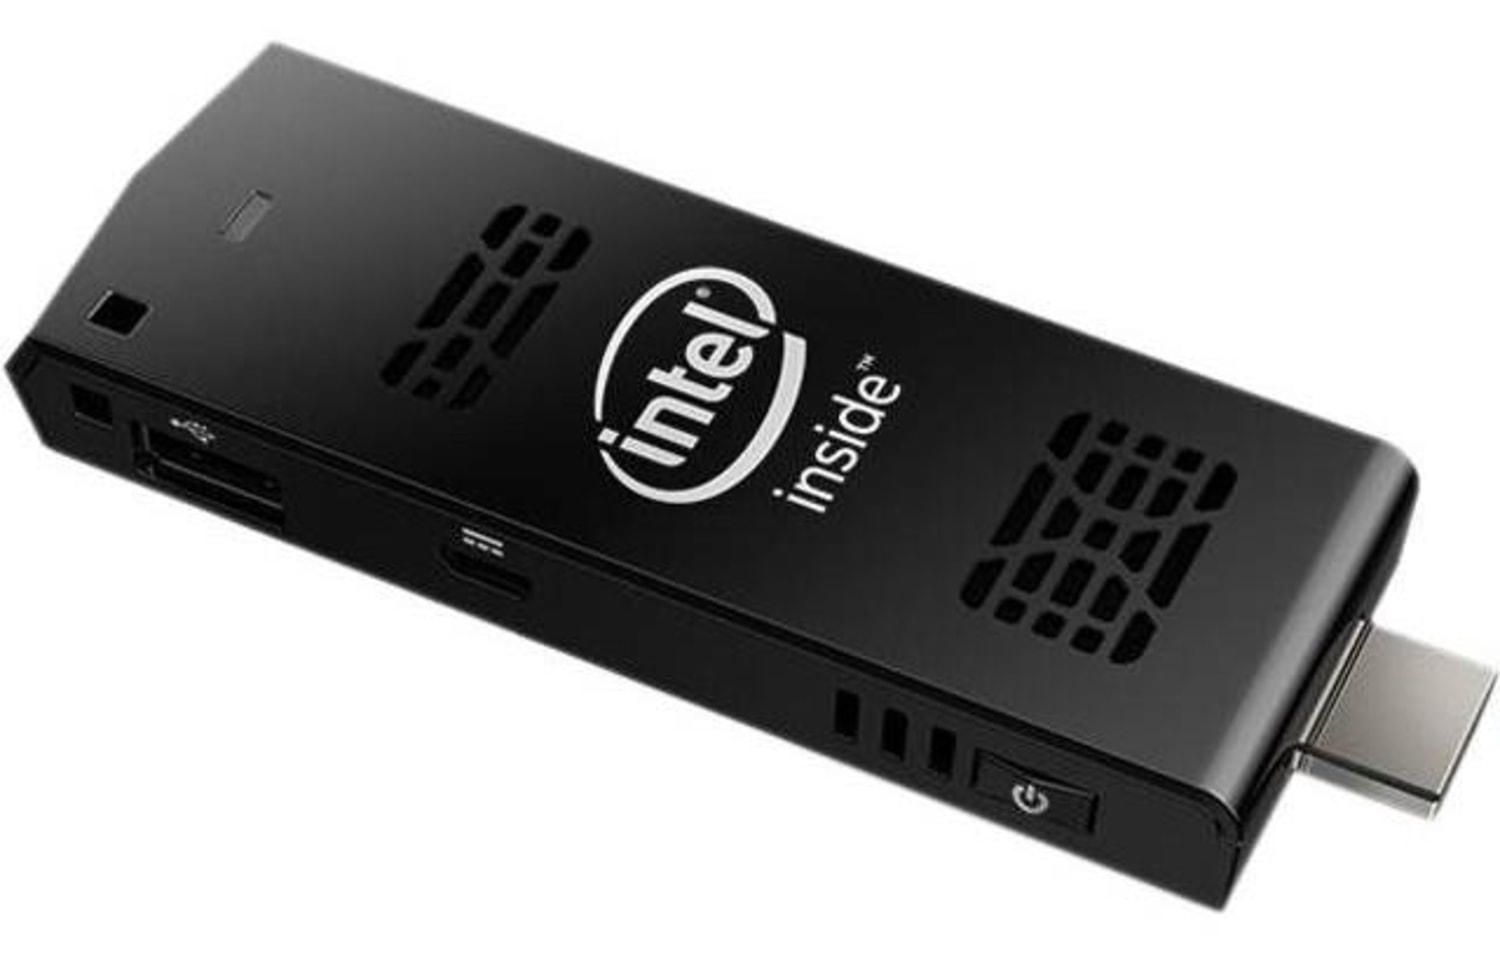 Intel's PC-on-a-Stick Is Available for Preorder